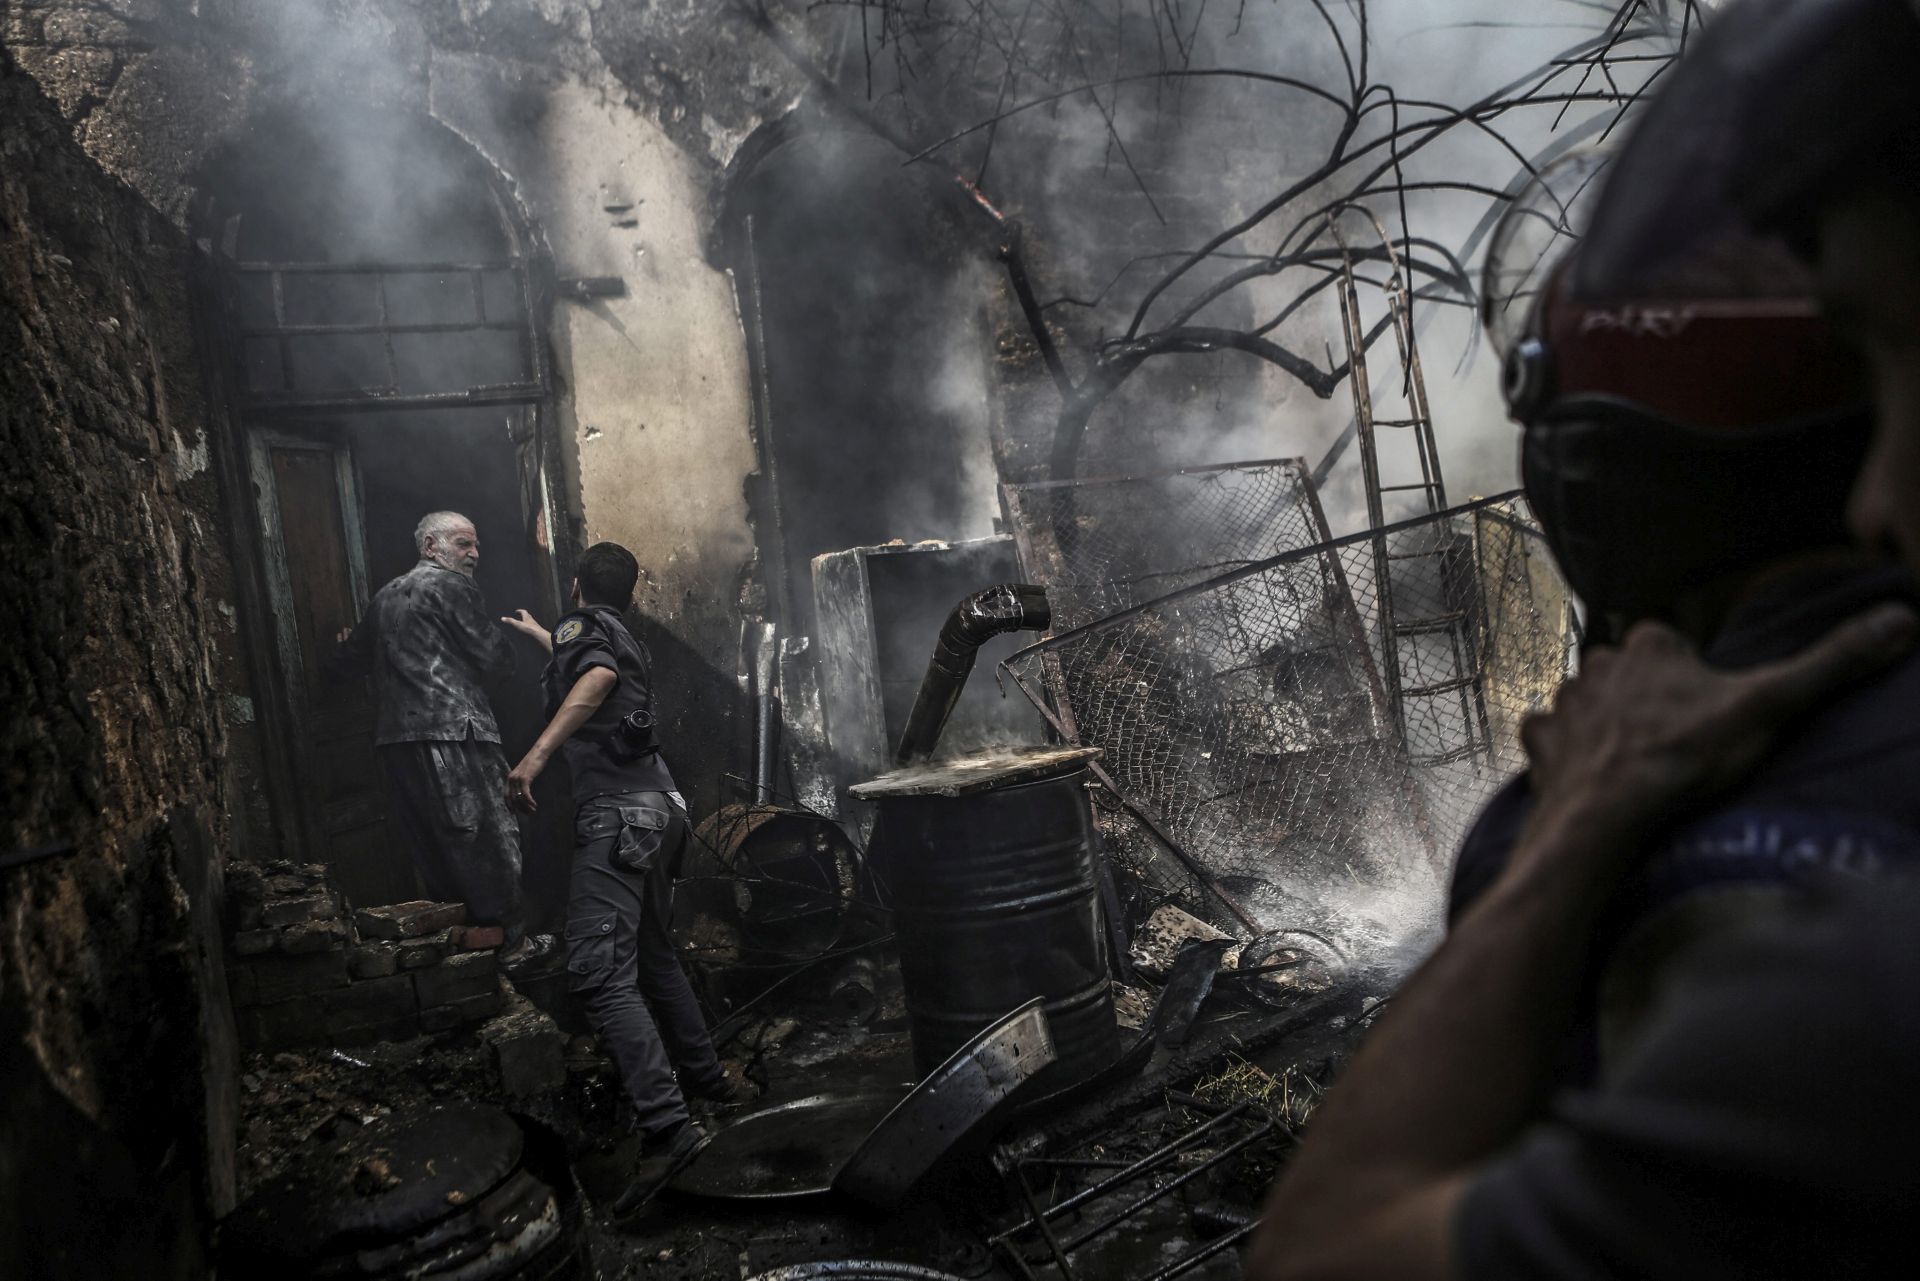 epa05671682 (FILE) A file picture dated 11 September 2016 shows White Helmets volunteer Hassan al-Muhshi (C) speaking to a man as firefighters extinguish a fire following an airstrike by forces loyal to the Syrian government in the rebel-held area of Douma, outskirts of Damascus, Syria. According to local sources, at least five people were killed in shelling and bombing on 11 December allegedly carried out by forces loyal to Syrian goverment, among them White Helmets volunteer Hassan al-Muhshi.  EPA/MOHAMMED BADRA